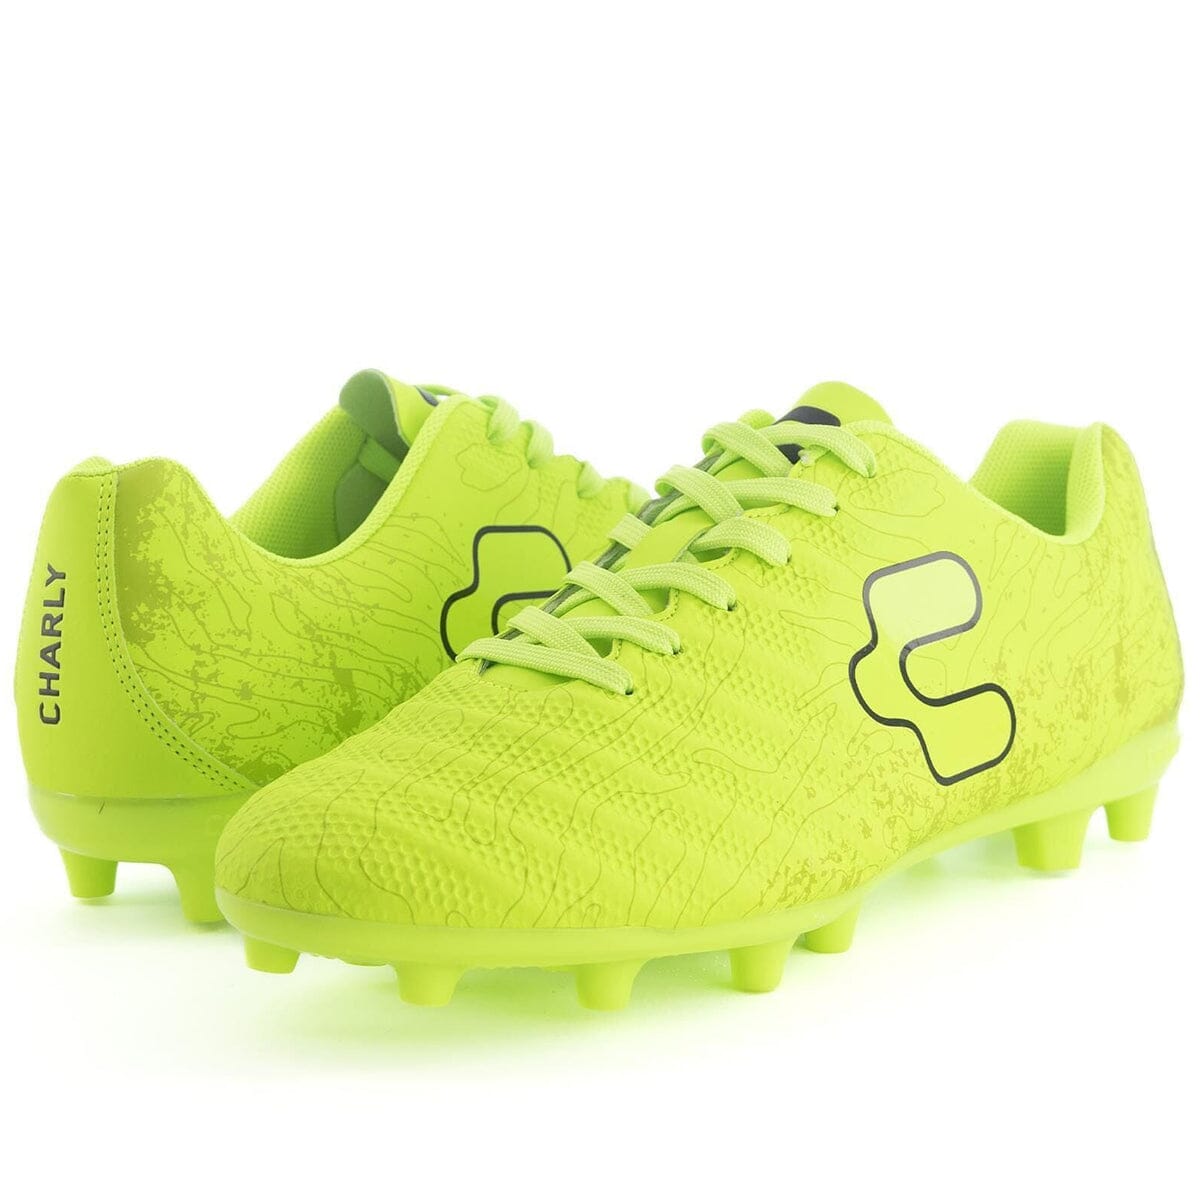 Charly Hotcross 2.0 Firm Ground Soccer Cleats | 1098597003 Cleats Charly 